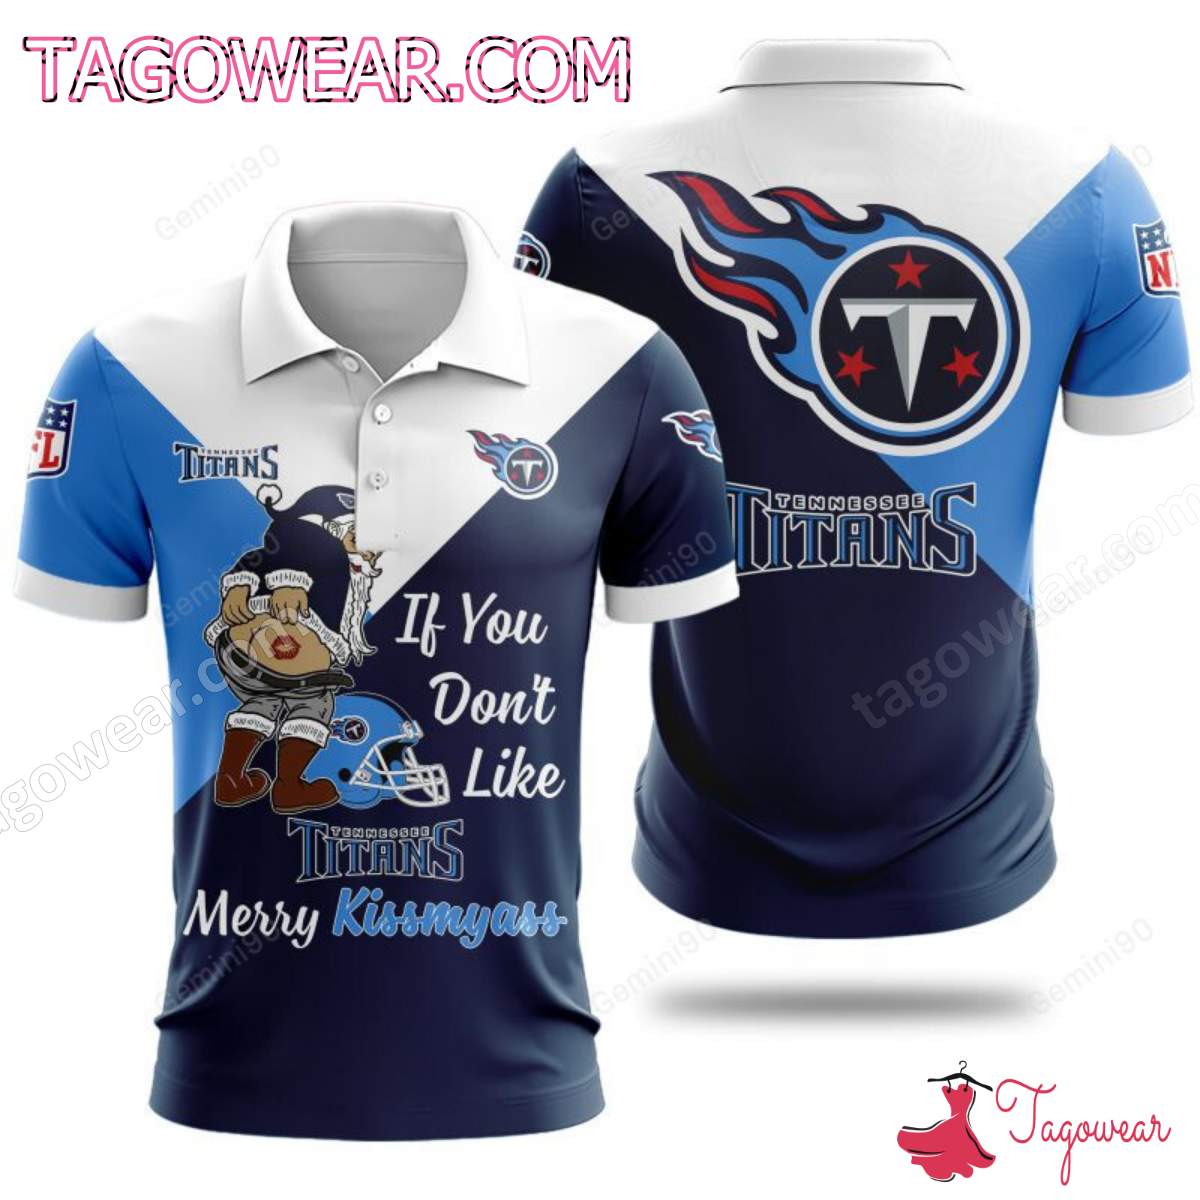 If You Don't Like Tennessee Titans Merry Kissmyass T-shirt, Polo, Hoodie